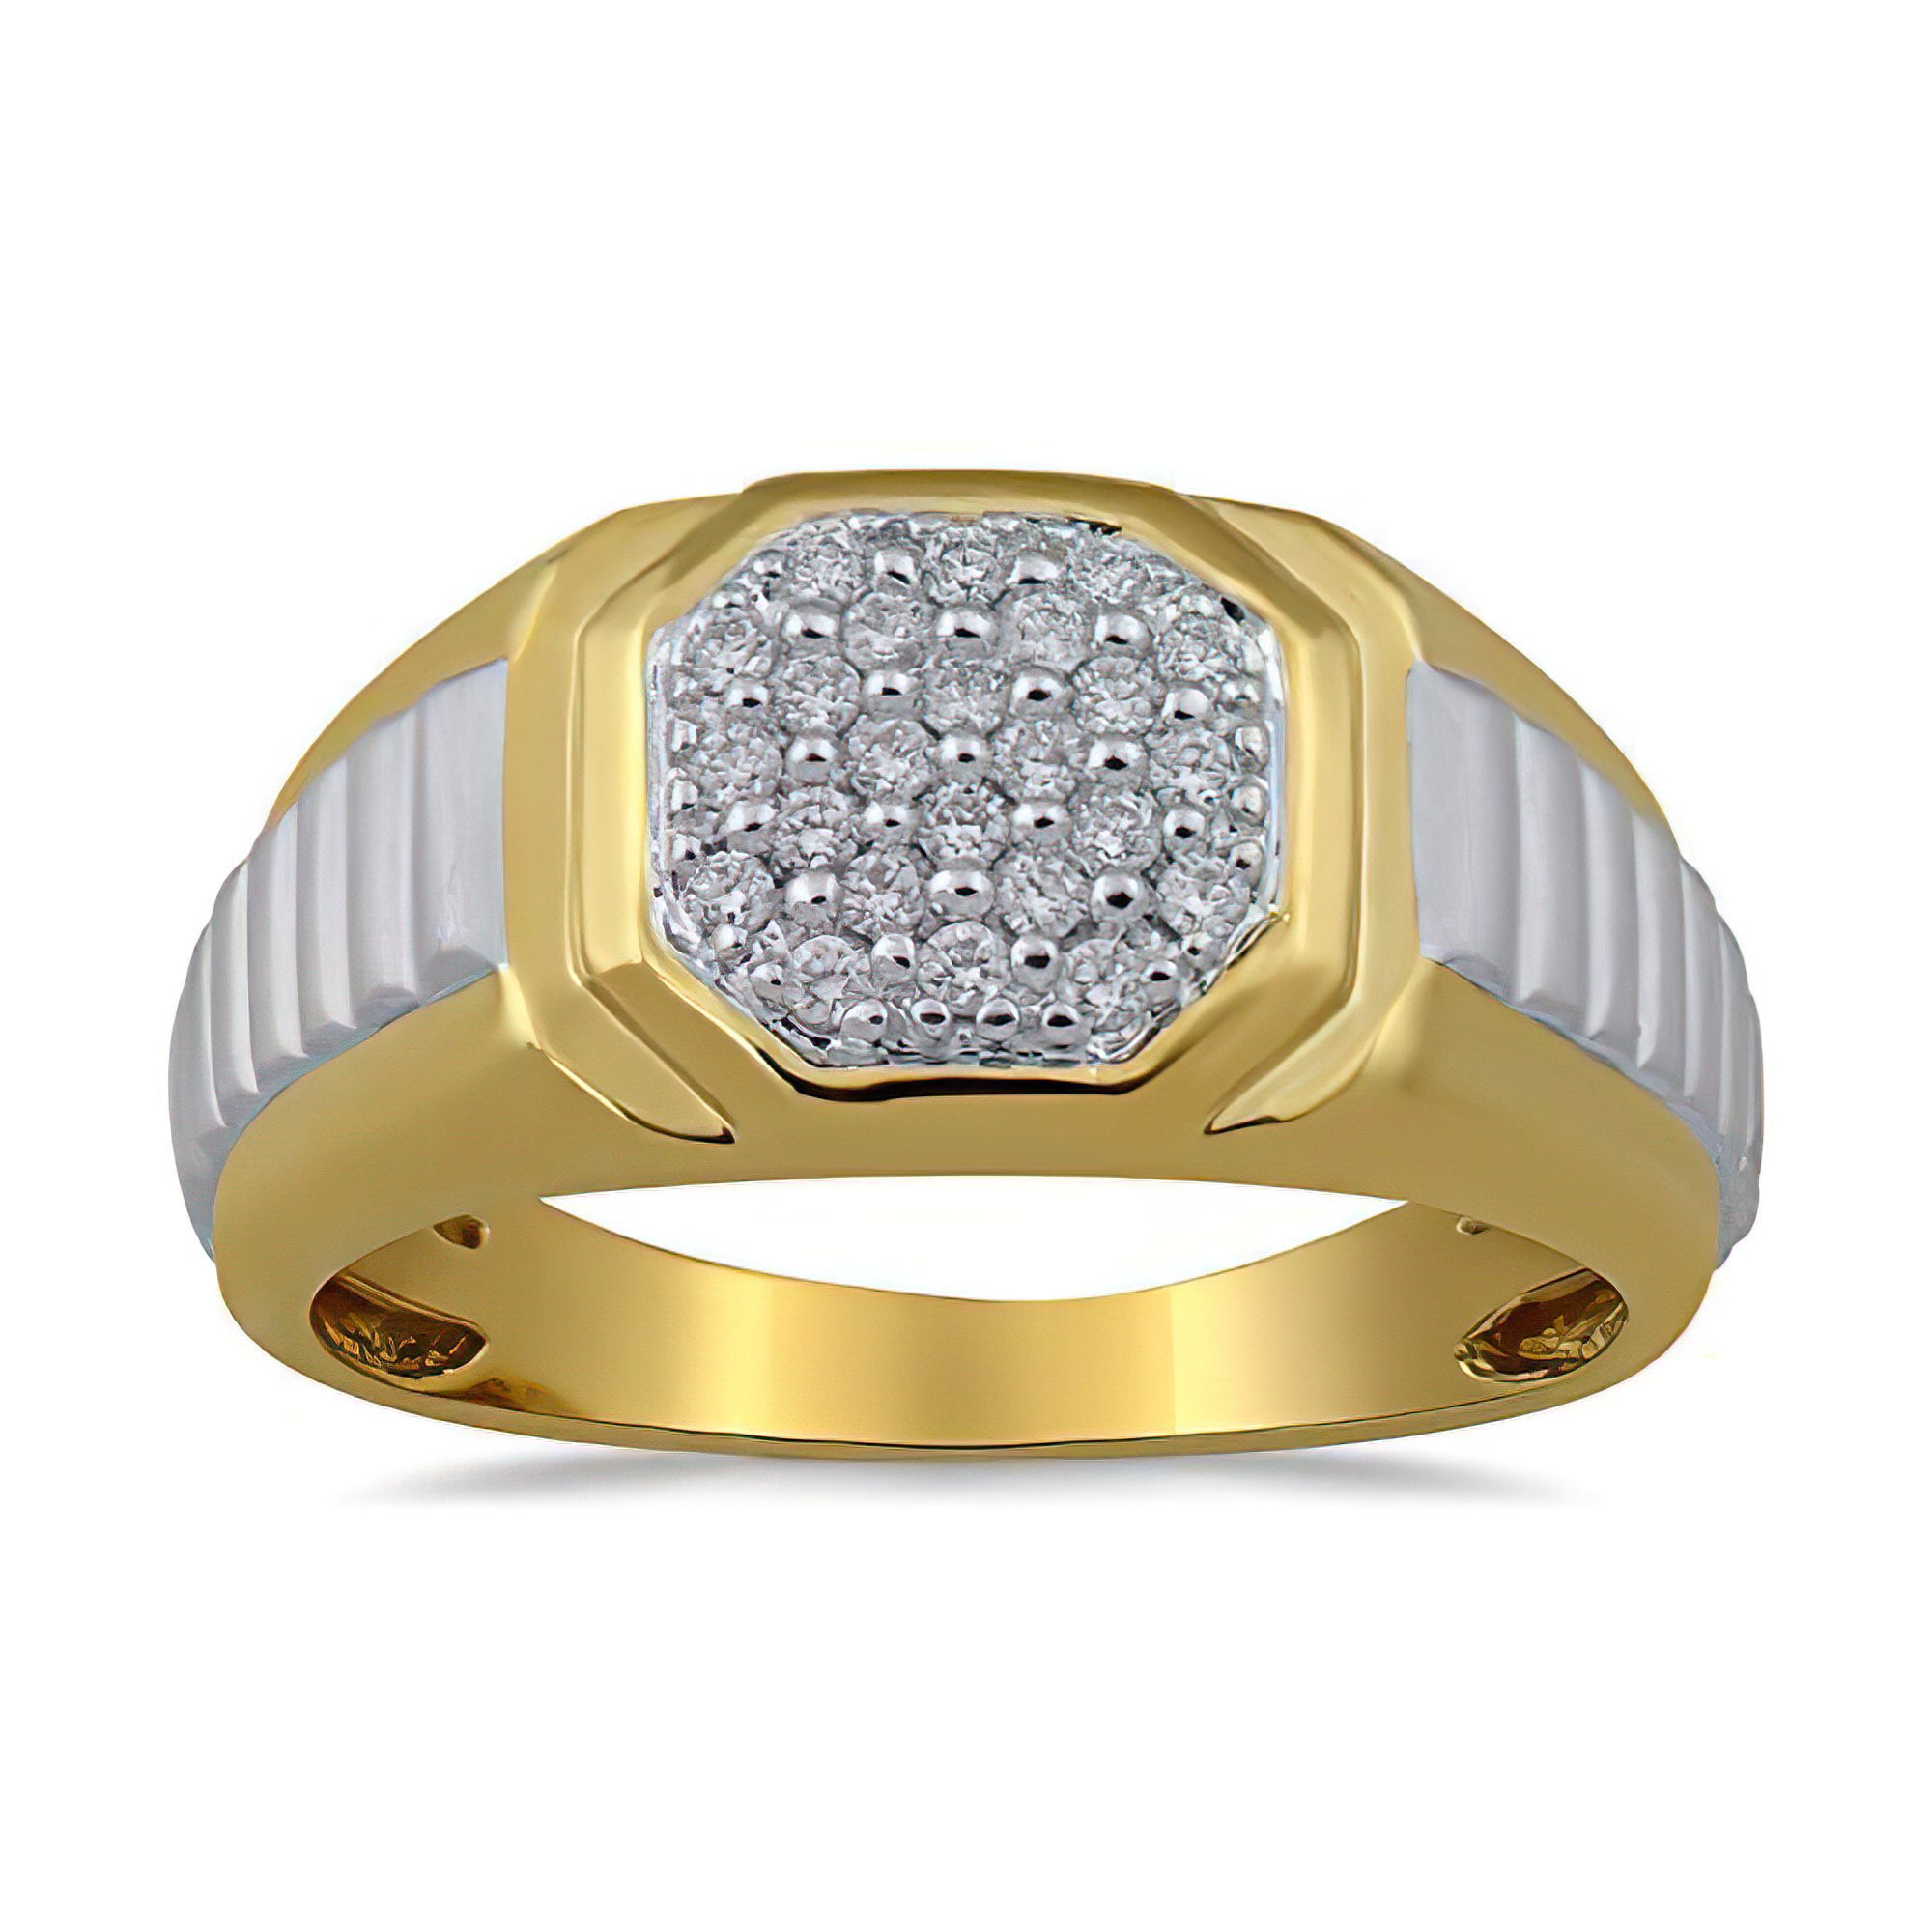 Mens Diamond Ring Sterling Silver or Gold Plated Silver Perfect Pinky Ring 